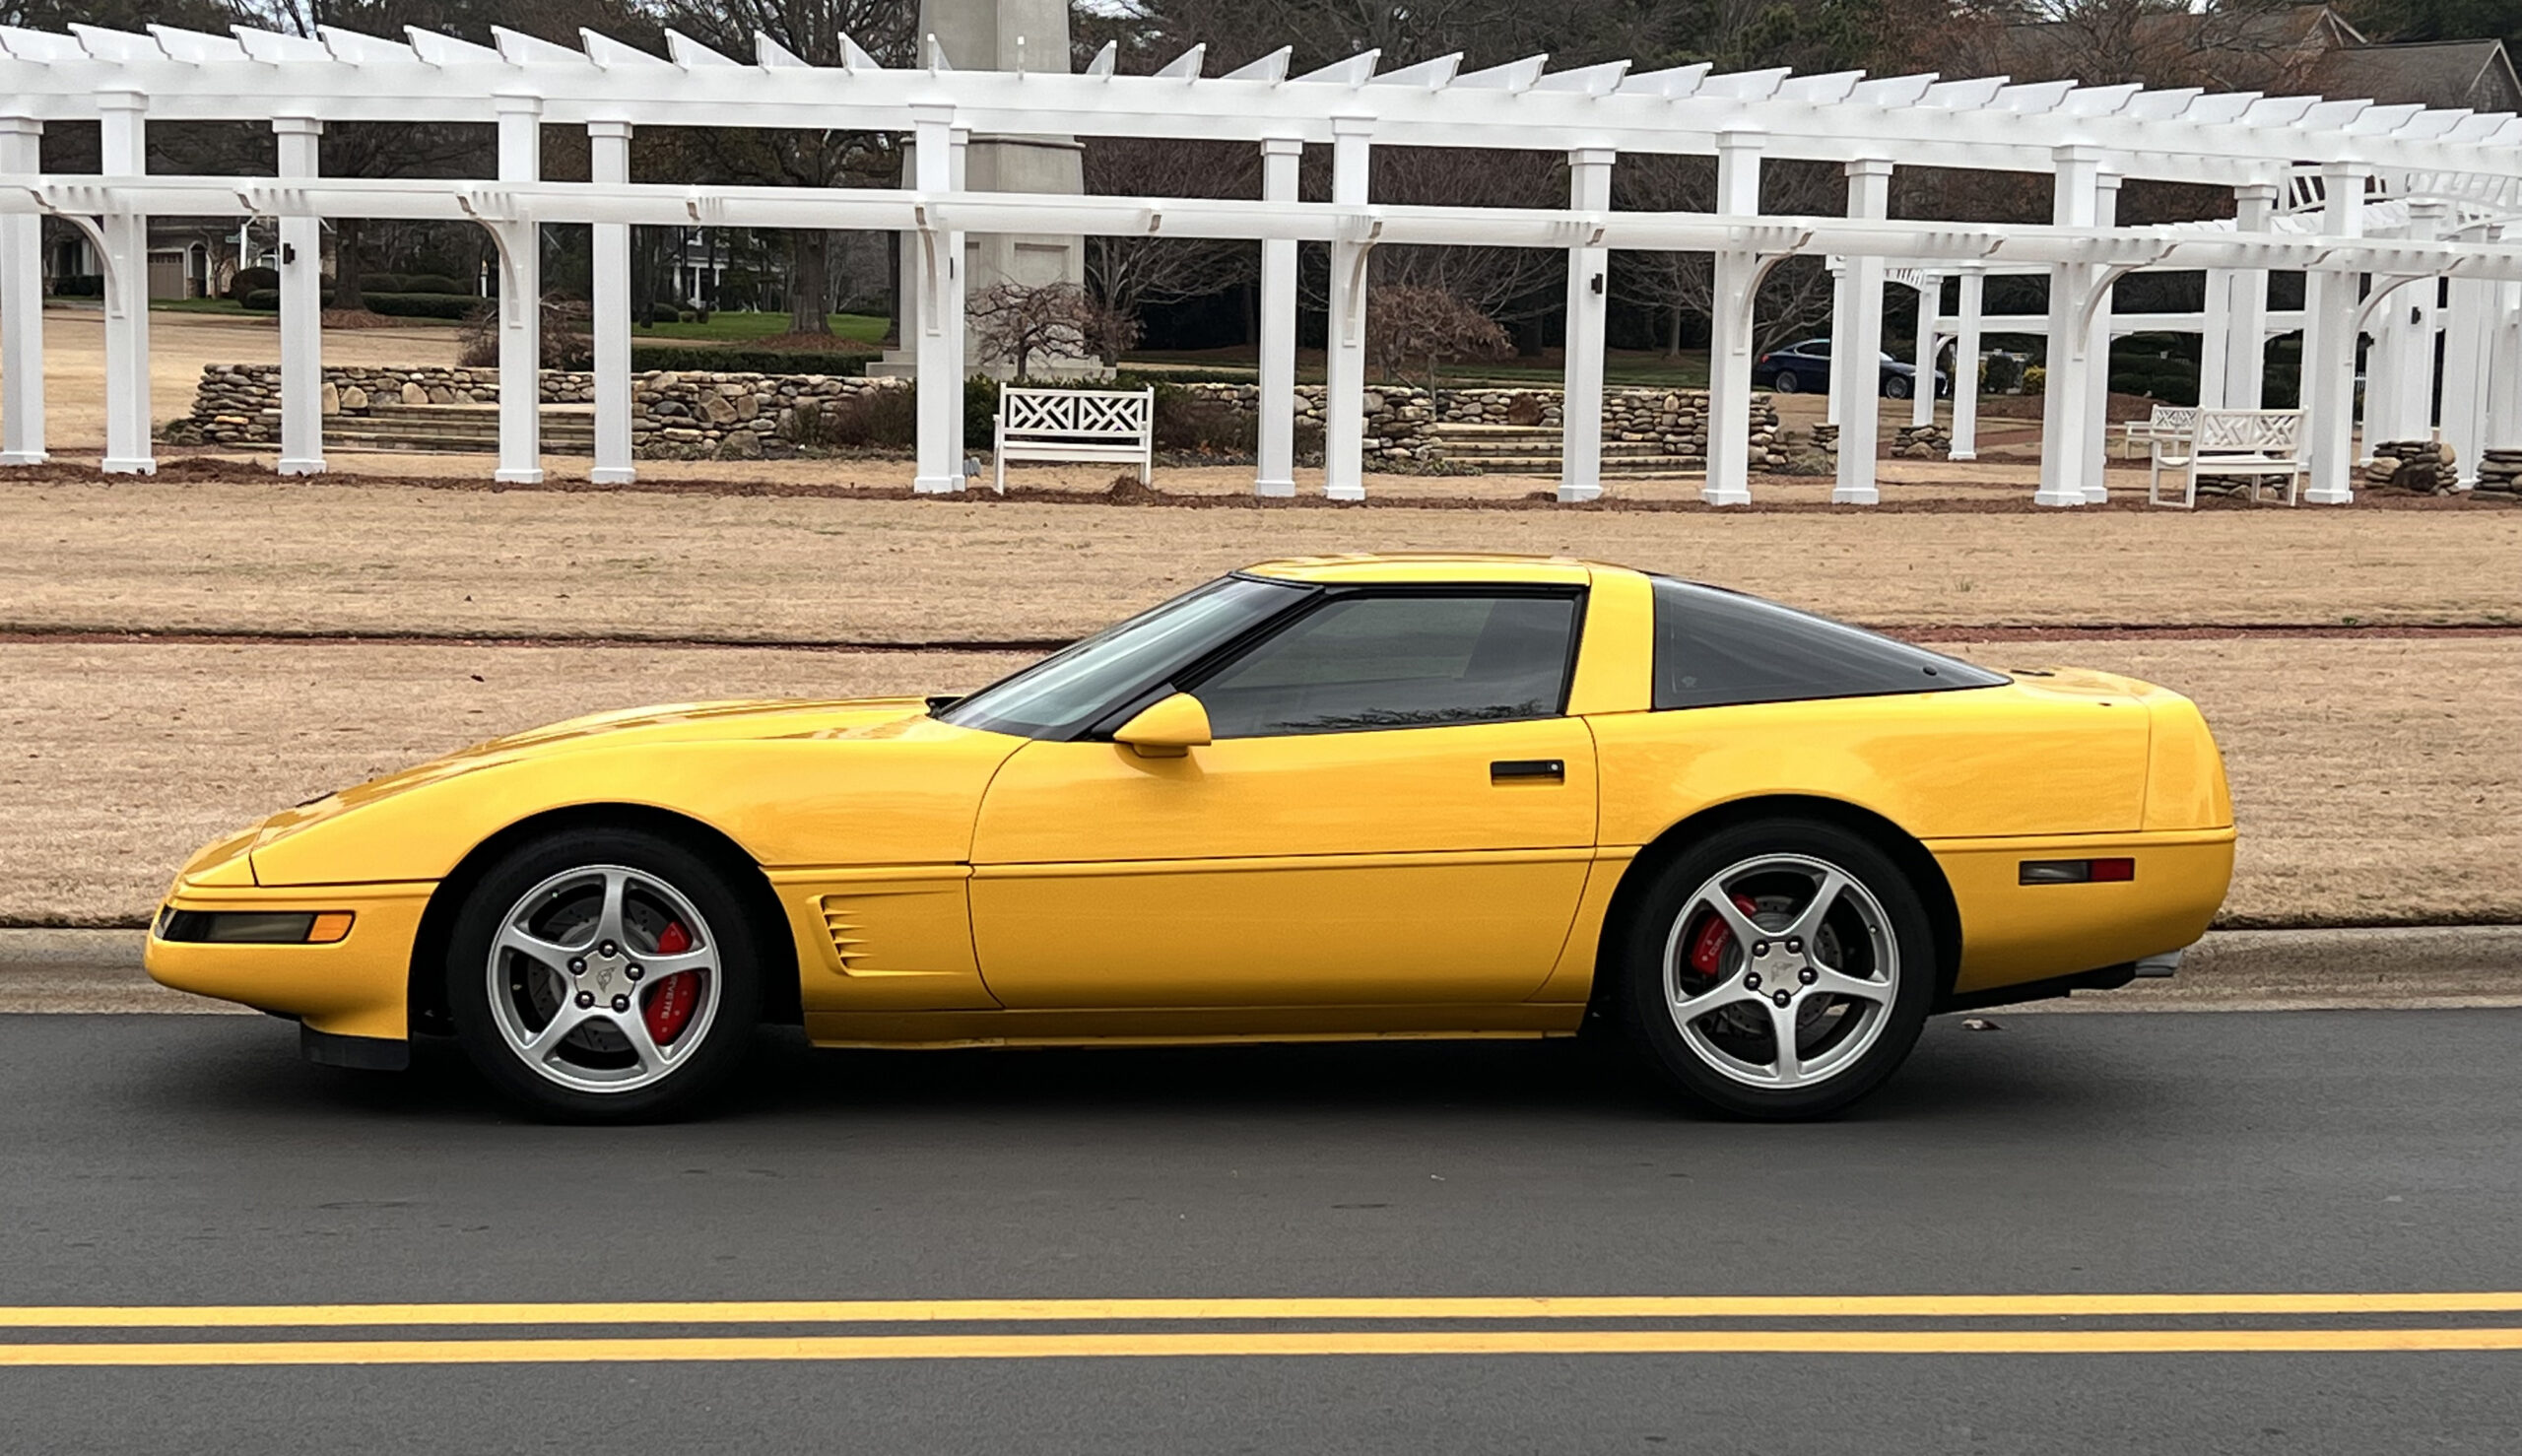 Carolina Classic Corvettes’ President Steve Madurski expects about a dozen cars to be displayed at the show — including his own bright yellow pride and joy.